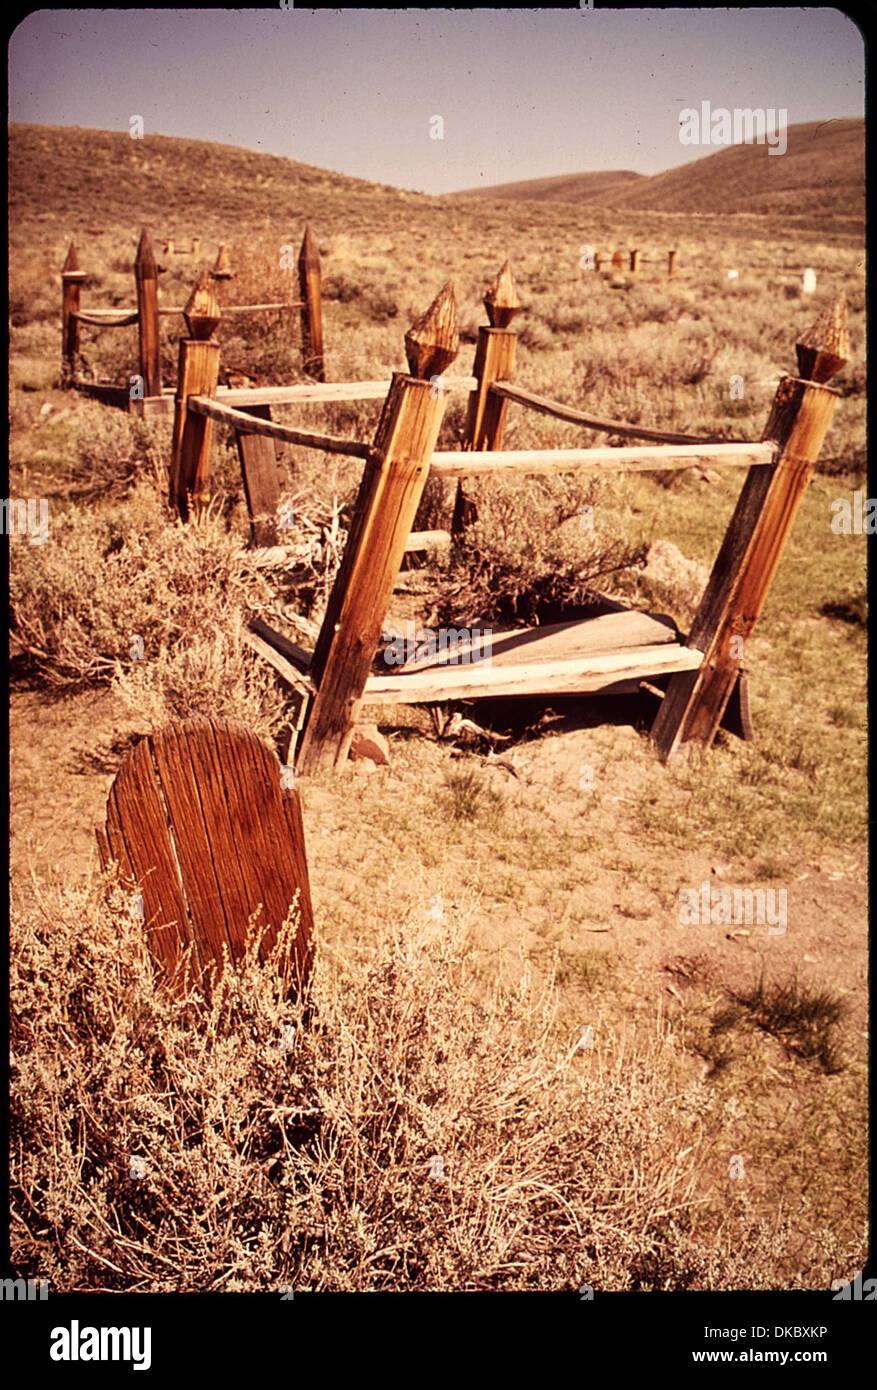 A WOODEN TOMBSTONE AND CEMETERY IN BODIE STATE HISTORICAL PARK. BODIE IS ONE OF THE MOST WELL-PRESERVED GHOST TOWNS... 543122 Stock Photo